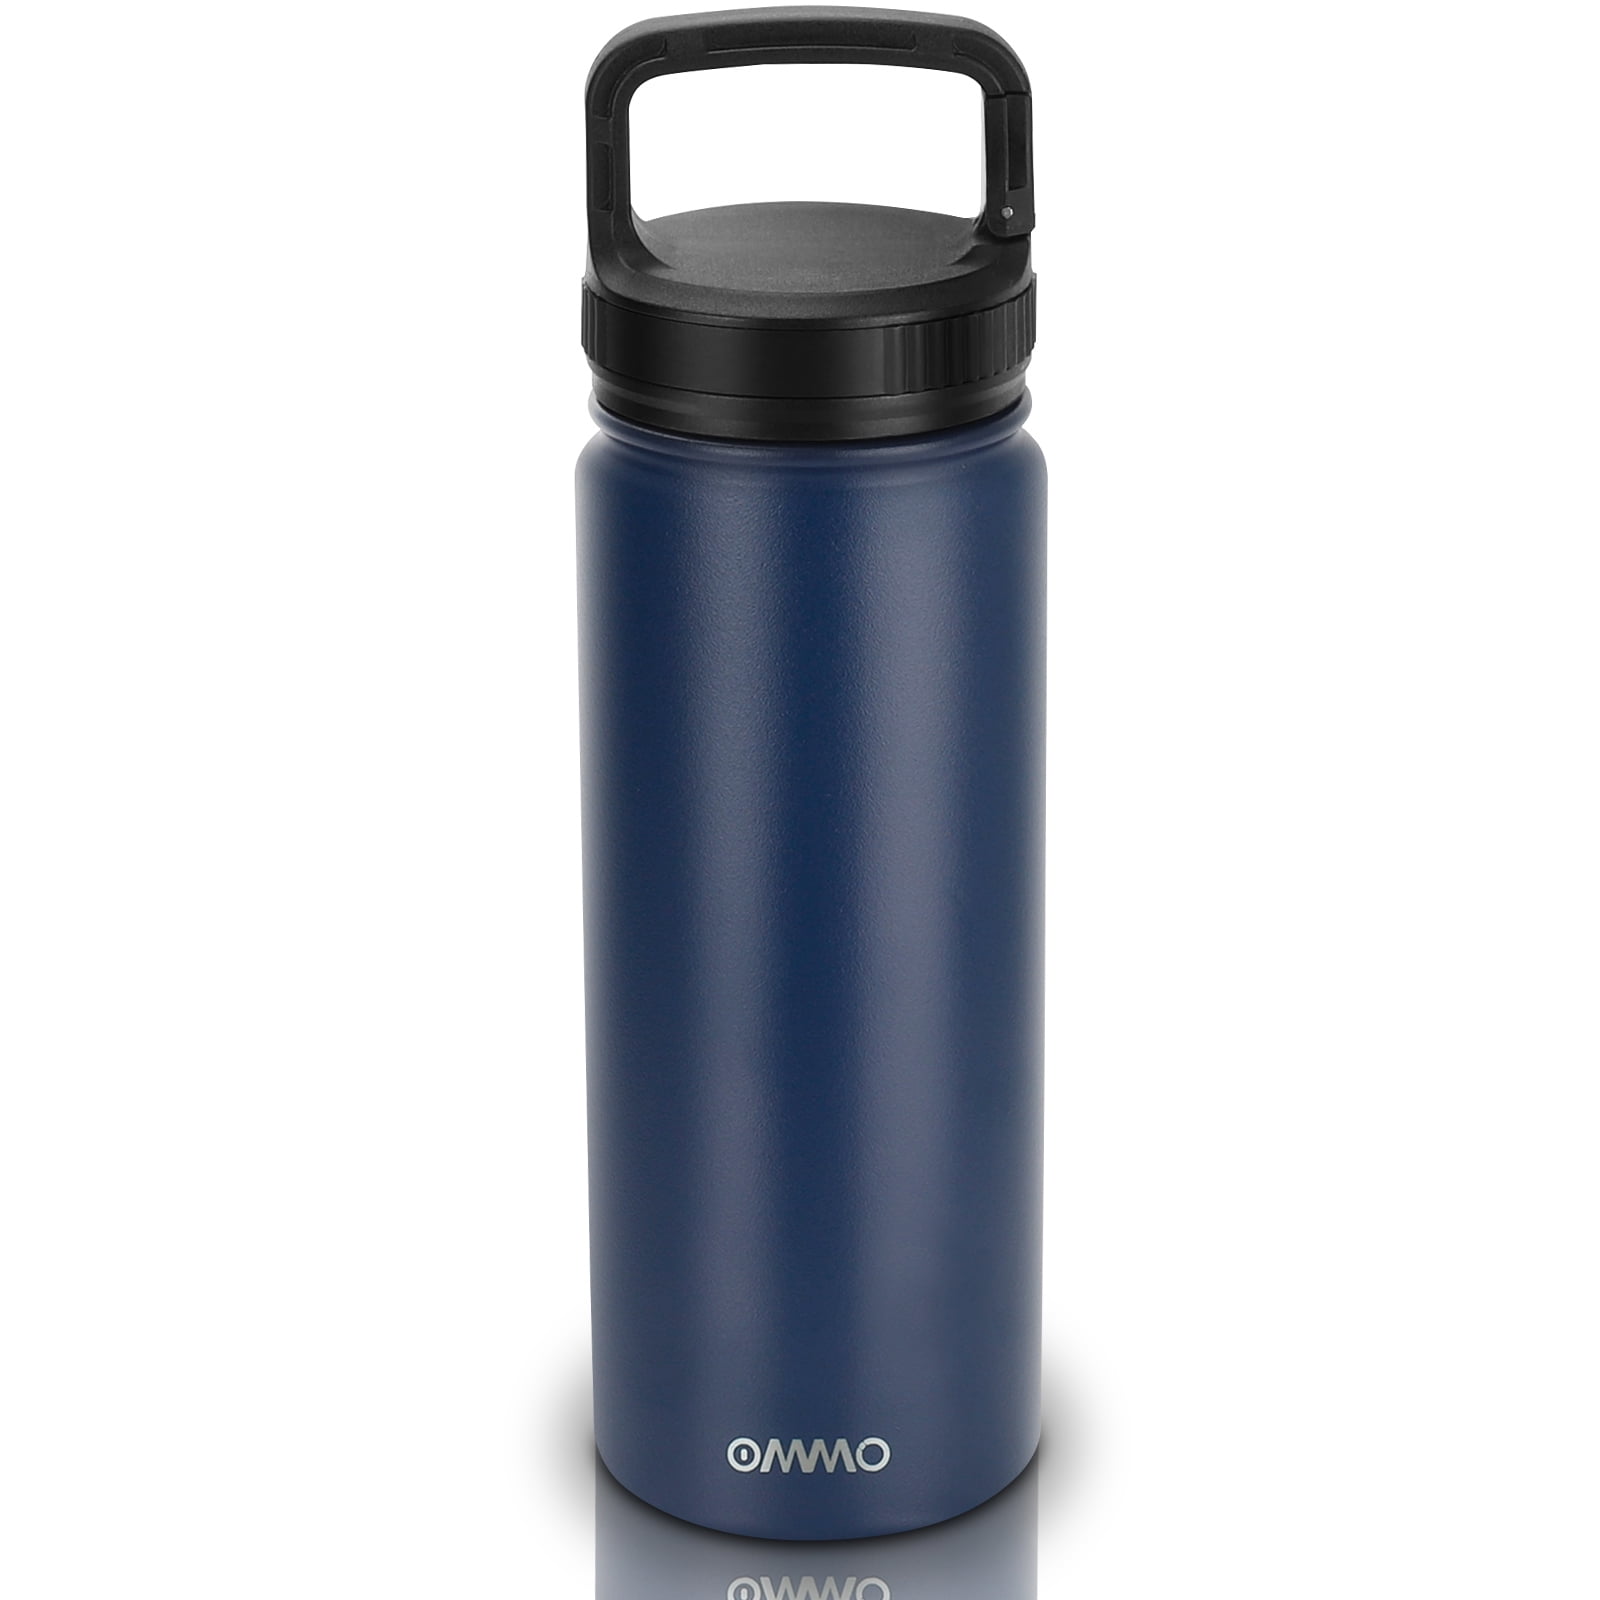 Bright Silver Quatii Stainless Steel Vacuum Insulated Water Bottles Sweat Free Flask with Leak Proof Lid Thermos Keeps Hot and Cold Travel Coffee Mug 17 oz